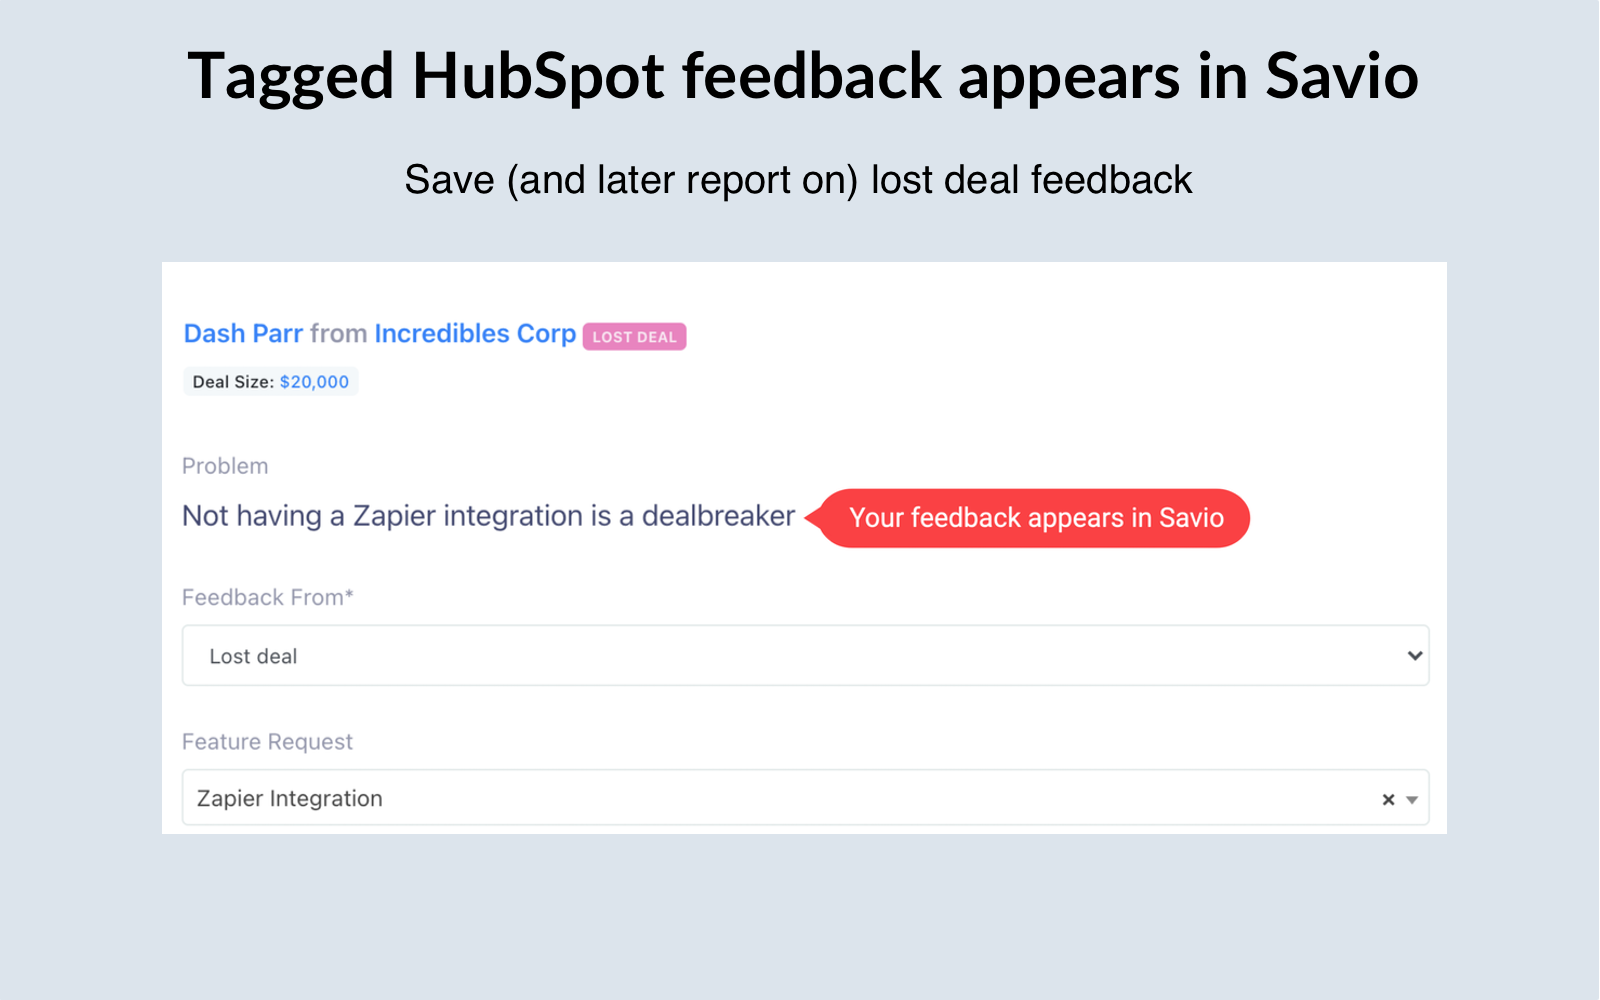 Track Feature requests in HubSpot